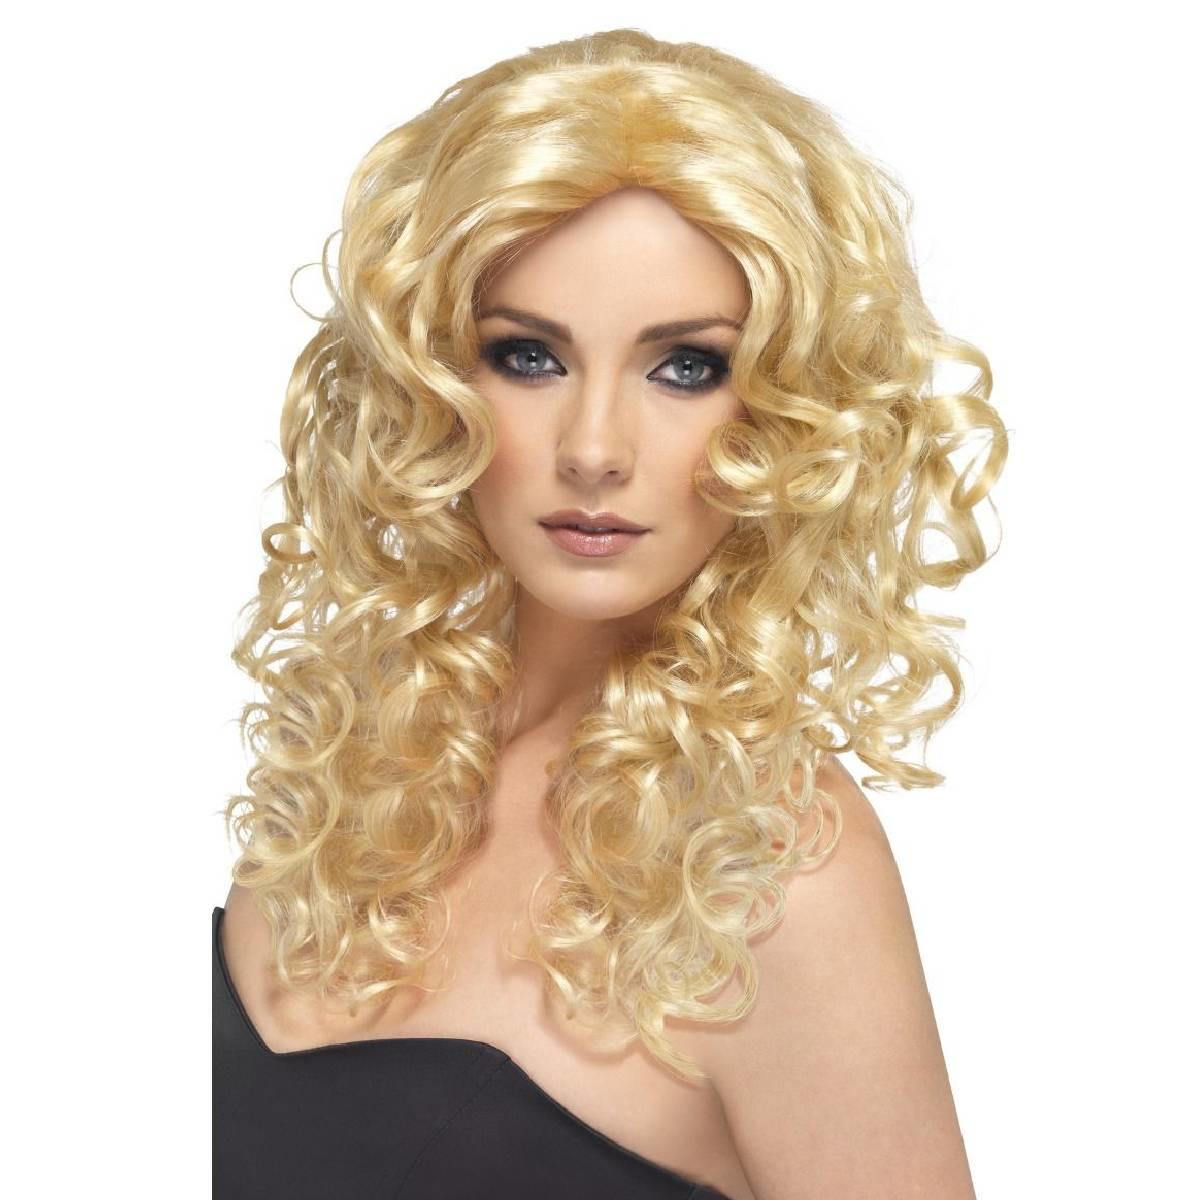 Glamour Wig in Blonde by Smiffys 42148 available from a collection here at Karnival Costumes online party shop